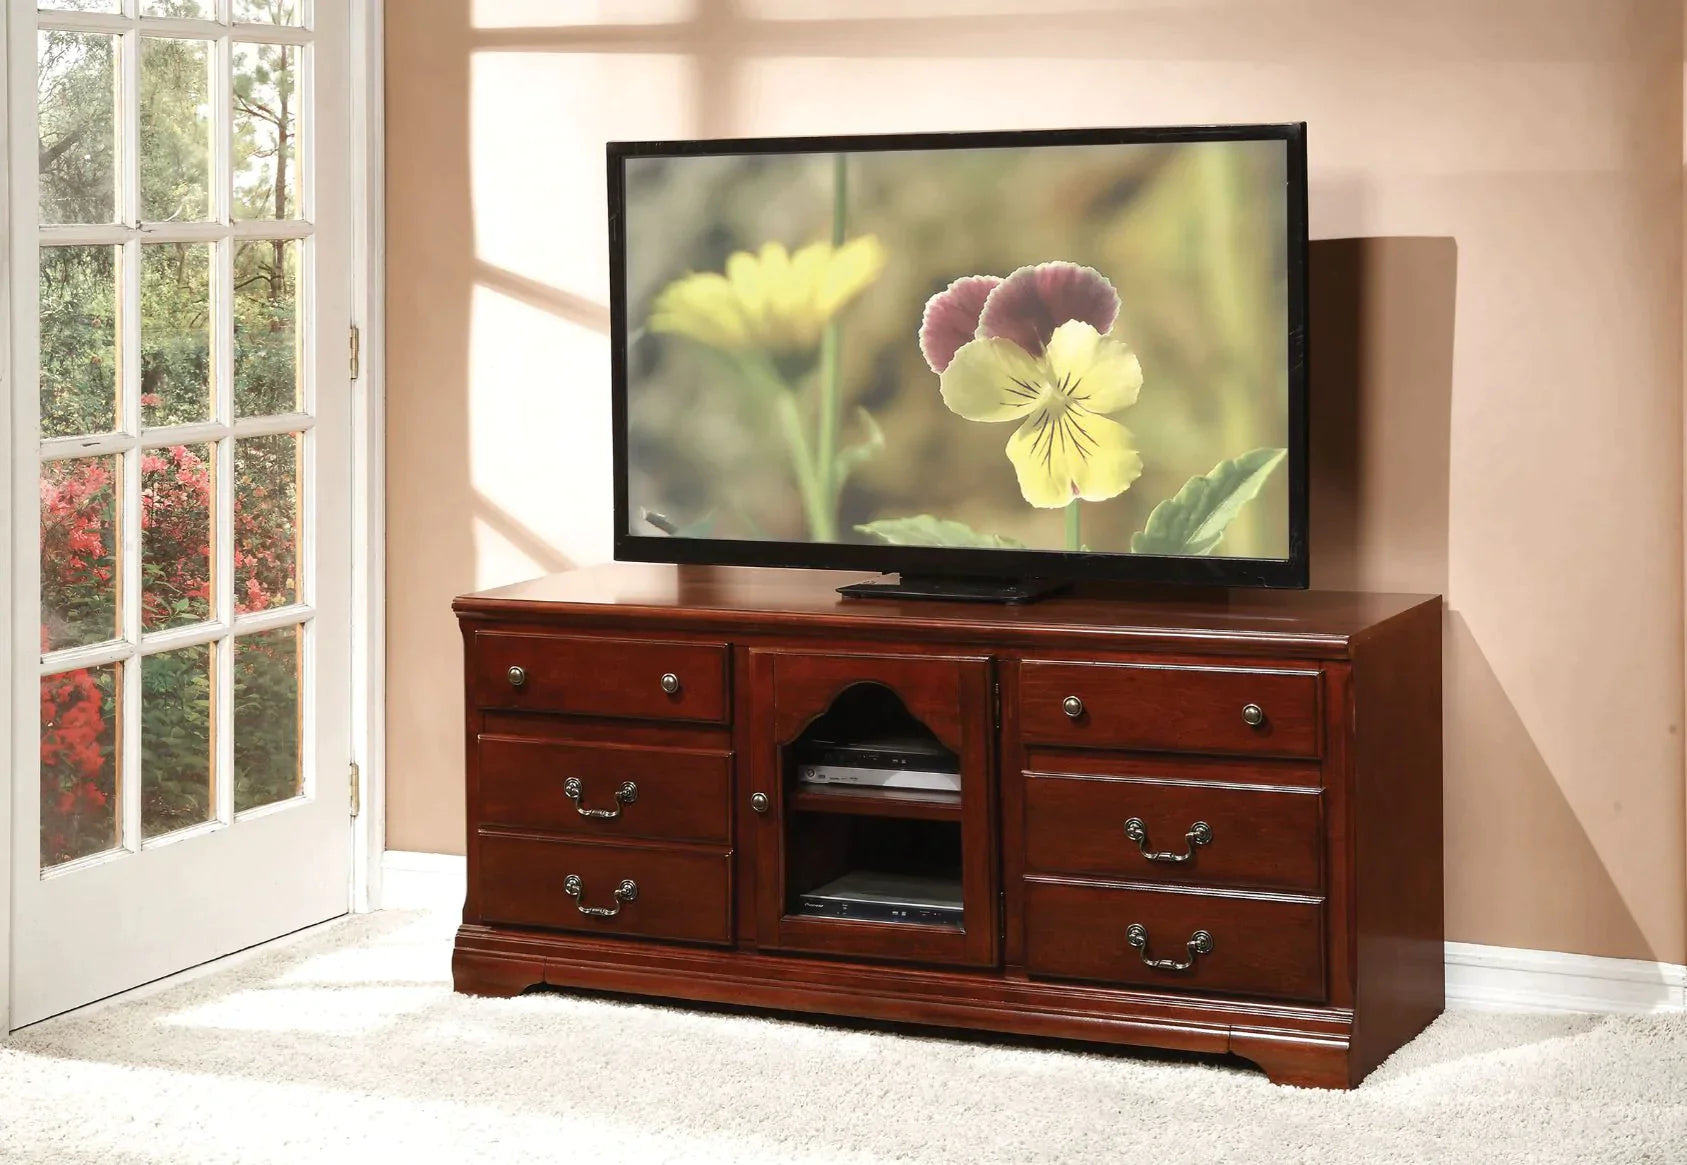 Hercules Cherry TV Stand Model 91113 By ACME Furniture